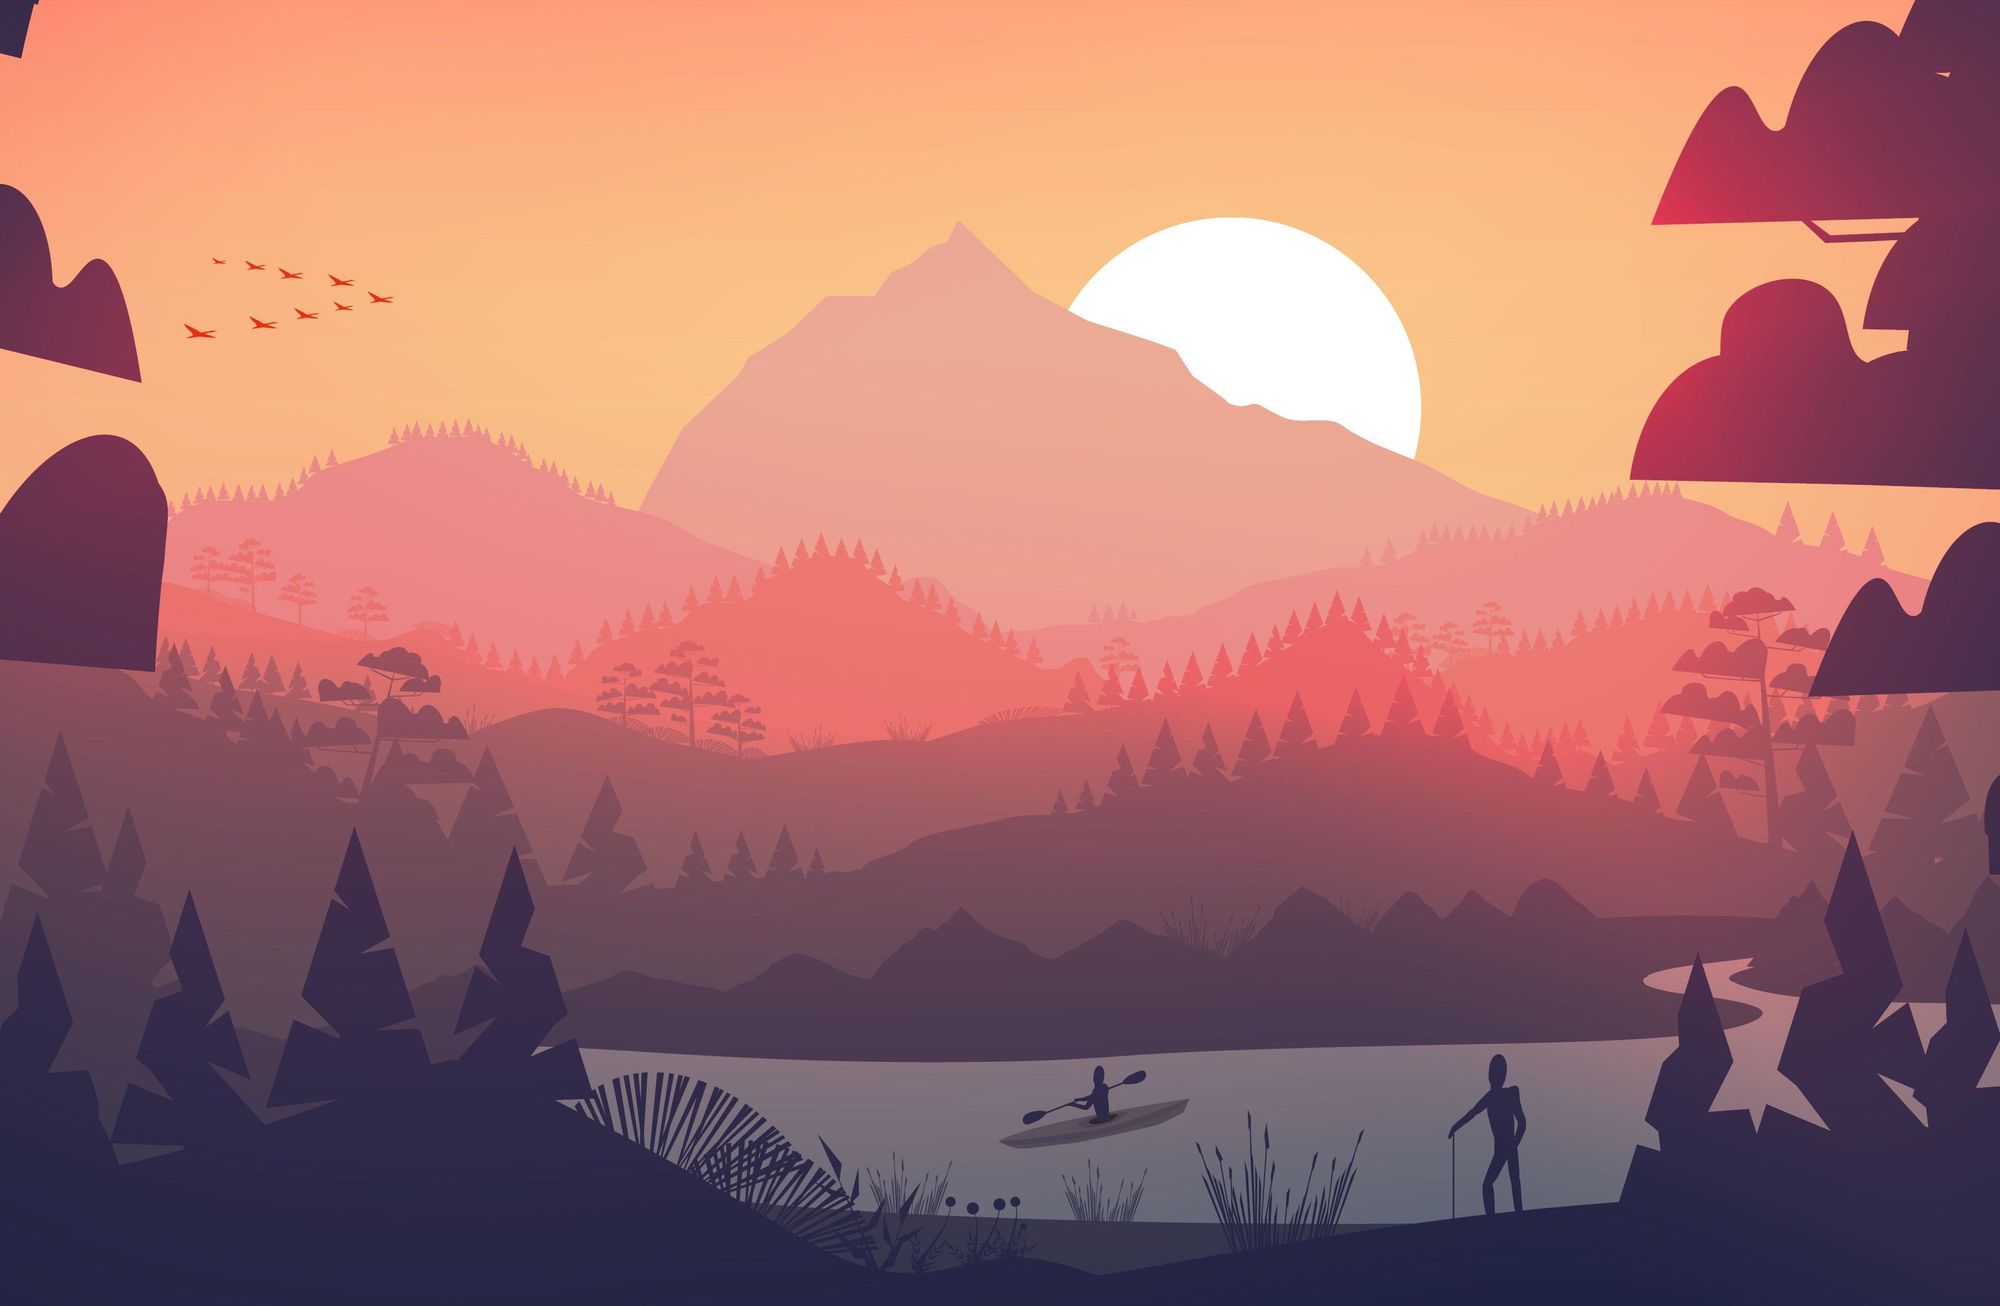 An illustration of a kayaker and a hiker in front of layering mountains and a sunset